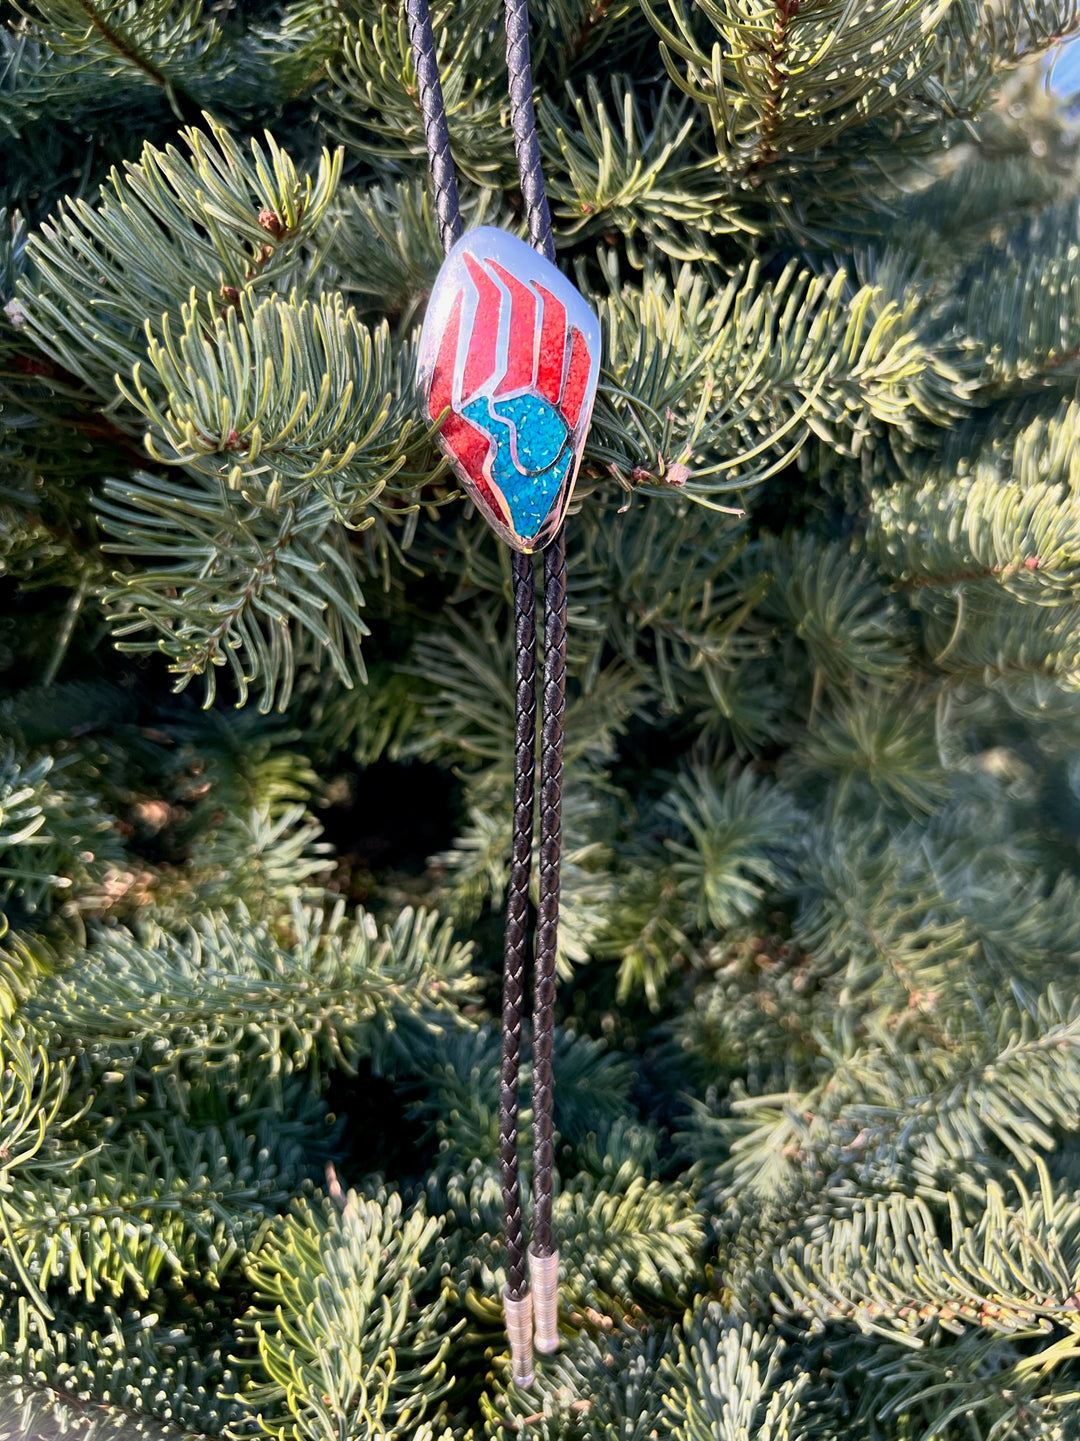 Black Leather Bolo Tie, Crushed Turquoise, Crushed Red Coral, Bear Claw